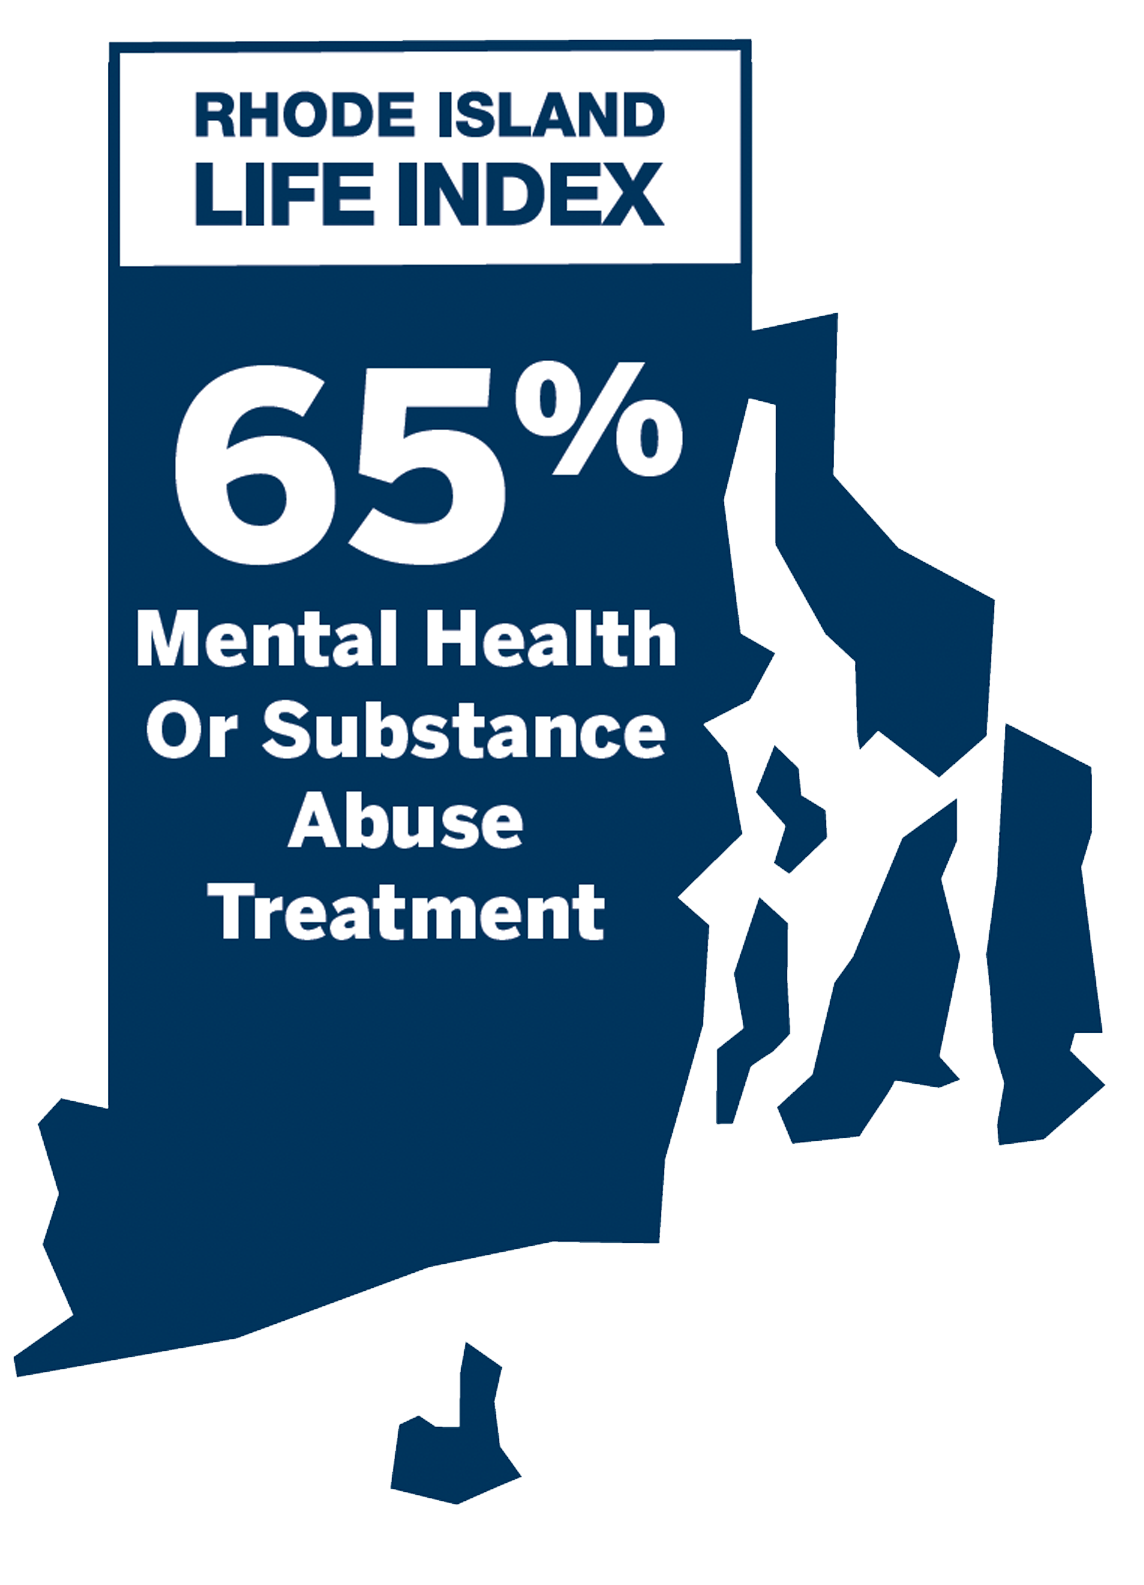 Mental Health or Substance Abuse Treatment: 65%